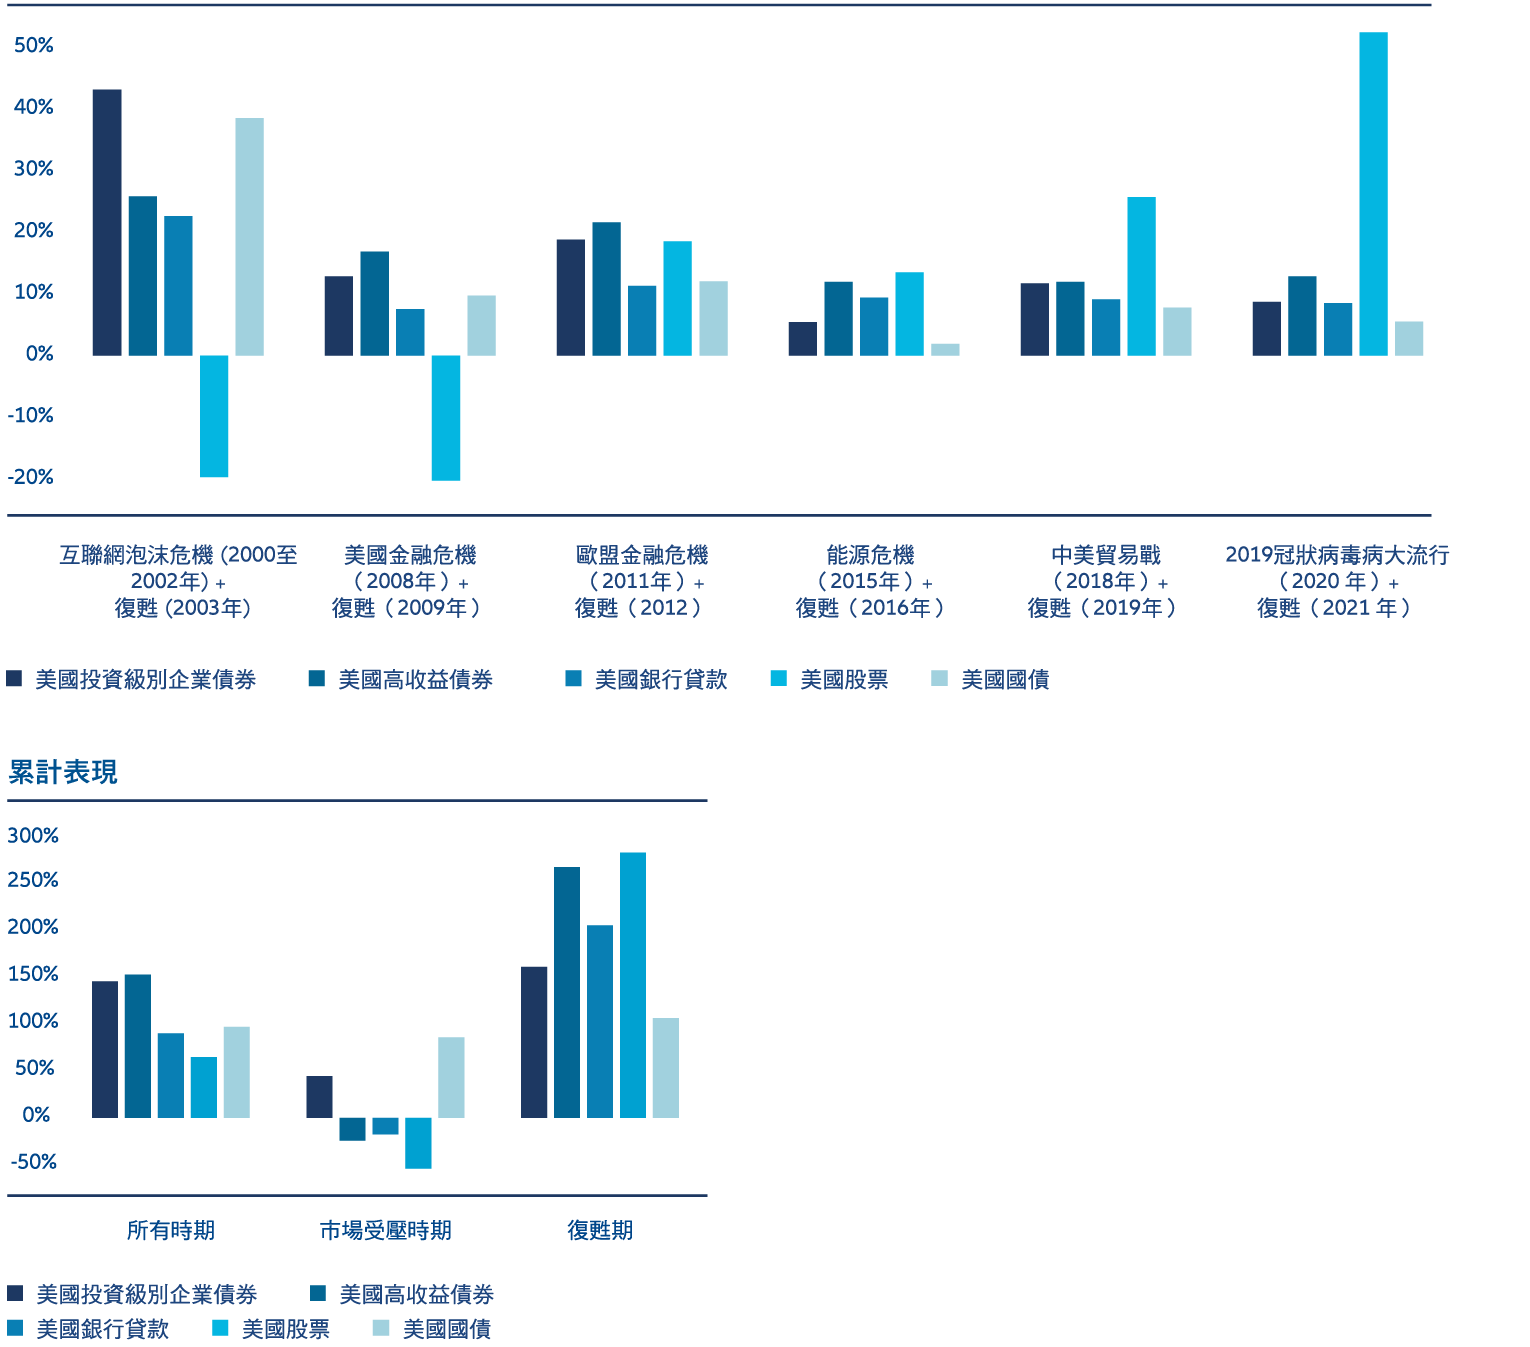 Allianz Global Investors – exclusions overview